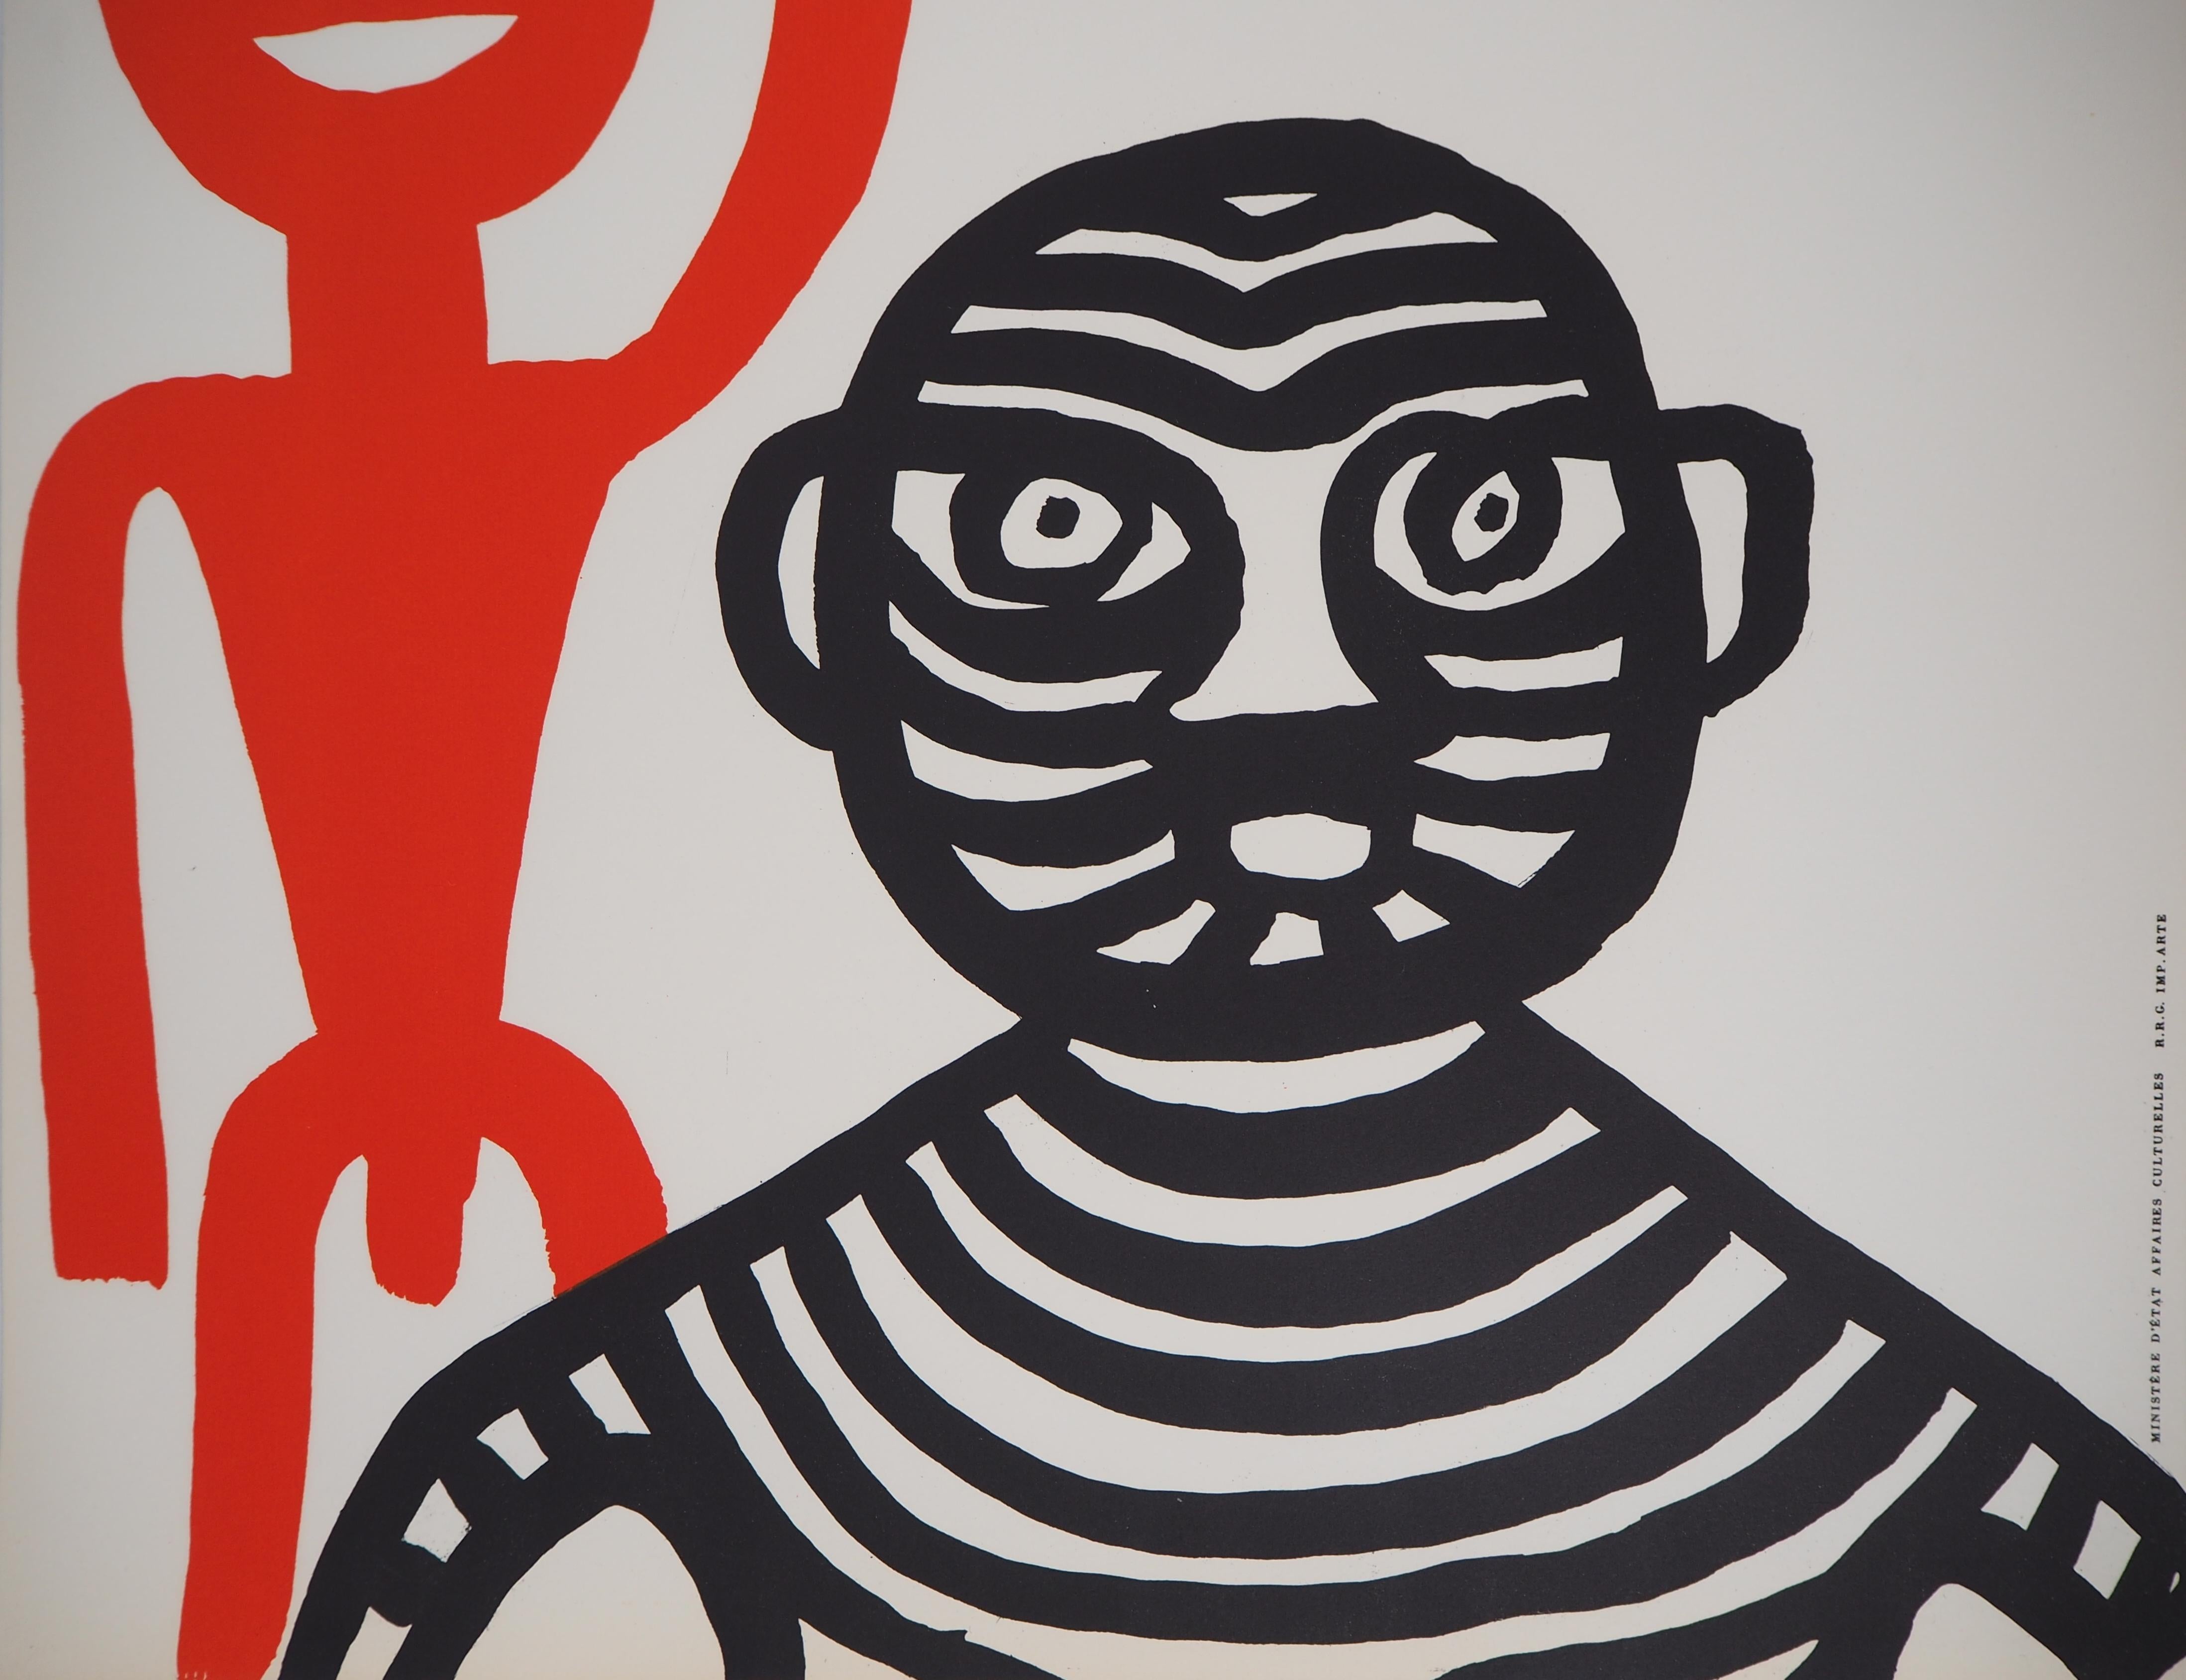 Tiger Man and Red Man Exhibition Poster, 1965 - American Modern Print by Alexander Calder